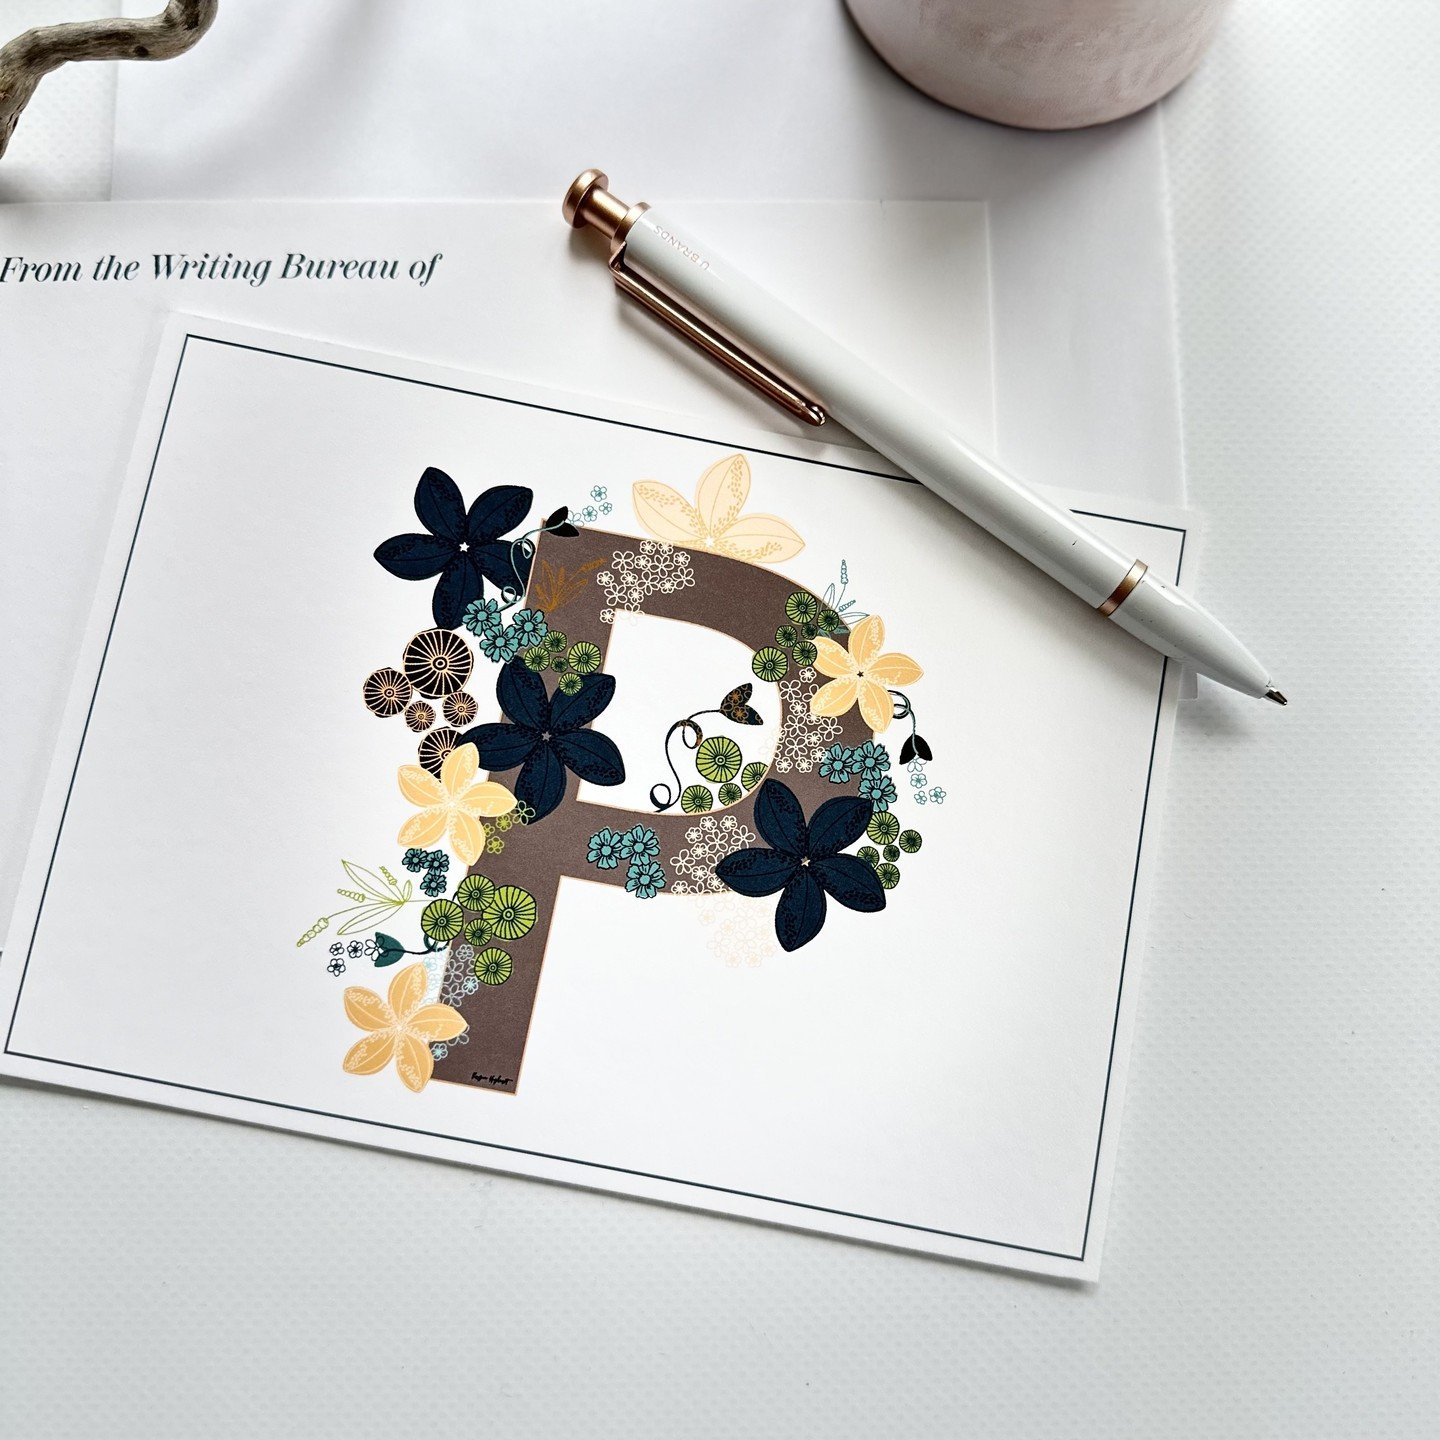 Letters in Bloom stationery. Personalized notecards. #floraldoodles #floralstationery #stationery #notecards #snailmail #snailmailrevolution #artlicensing